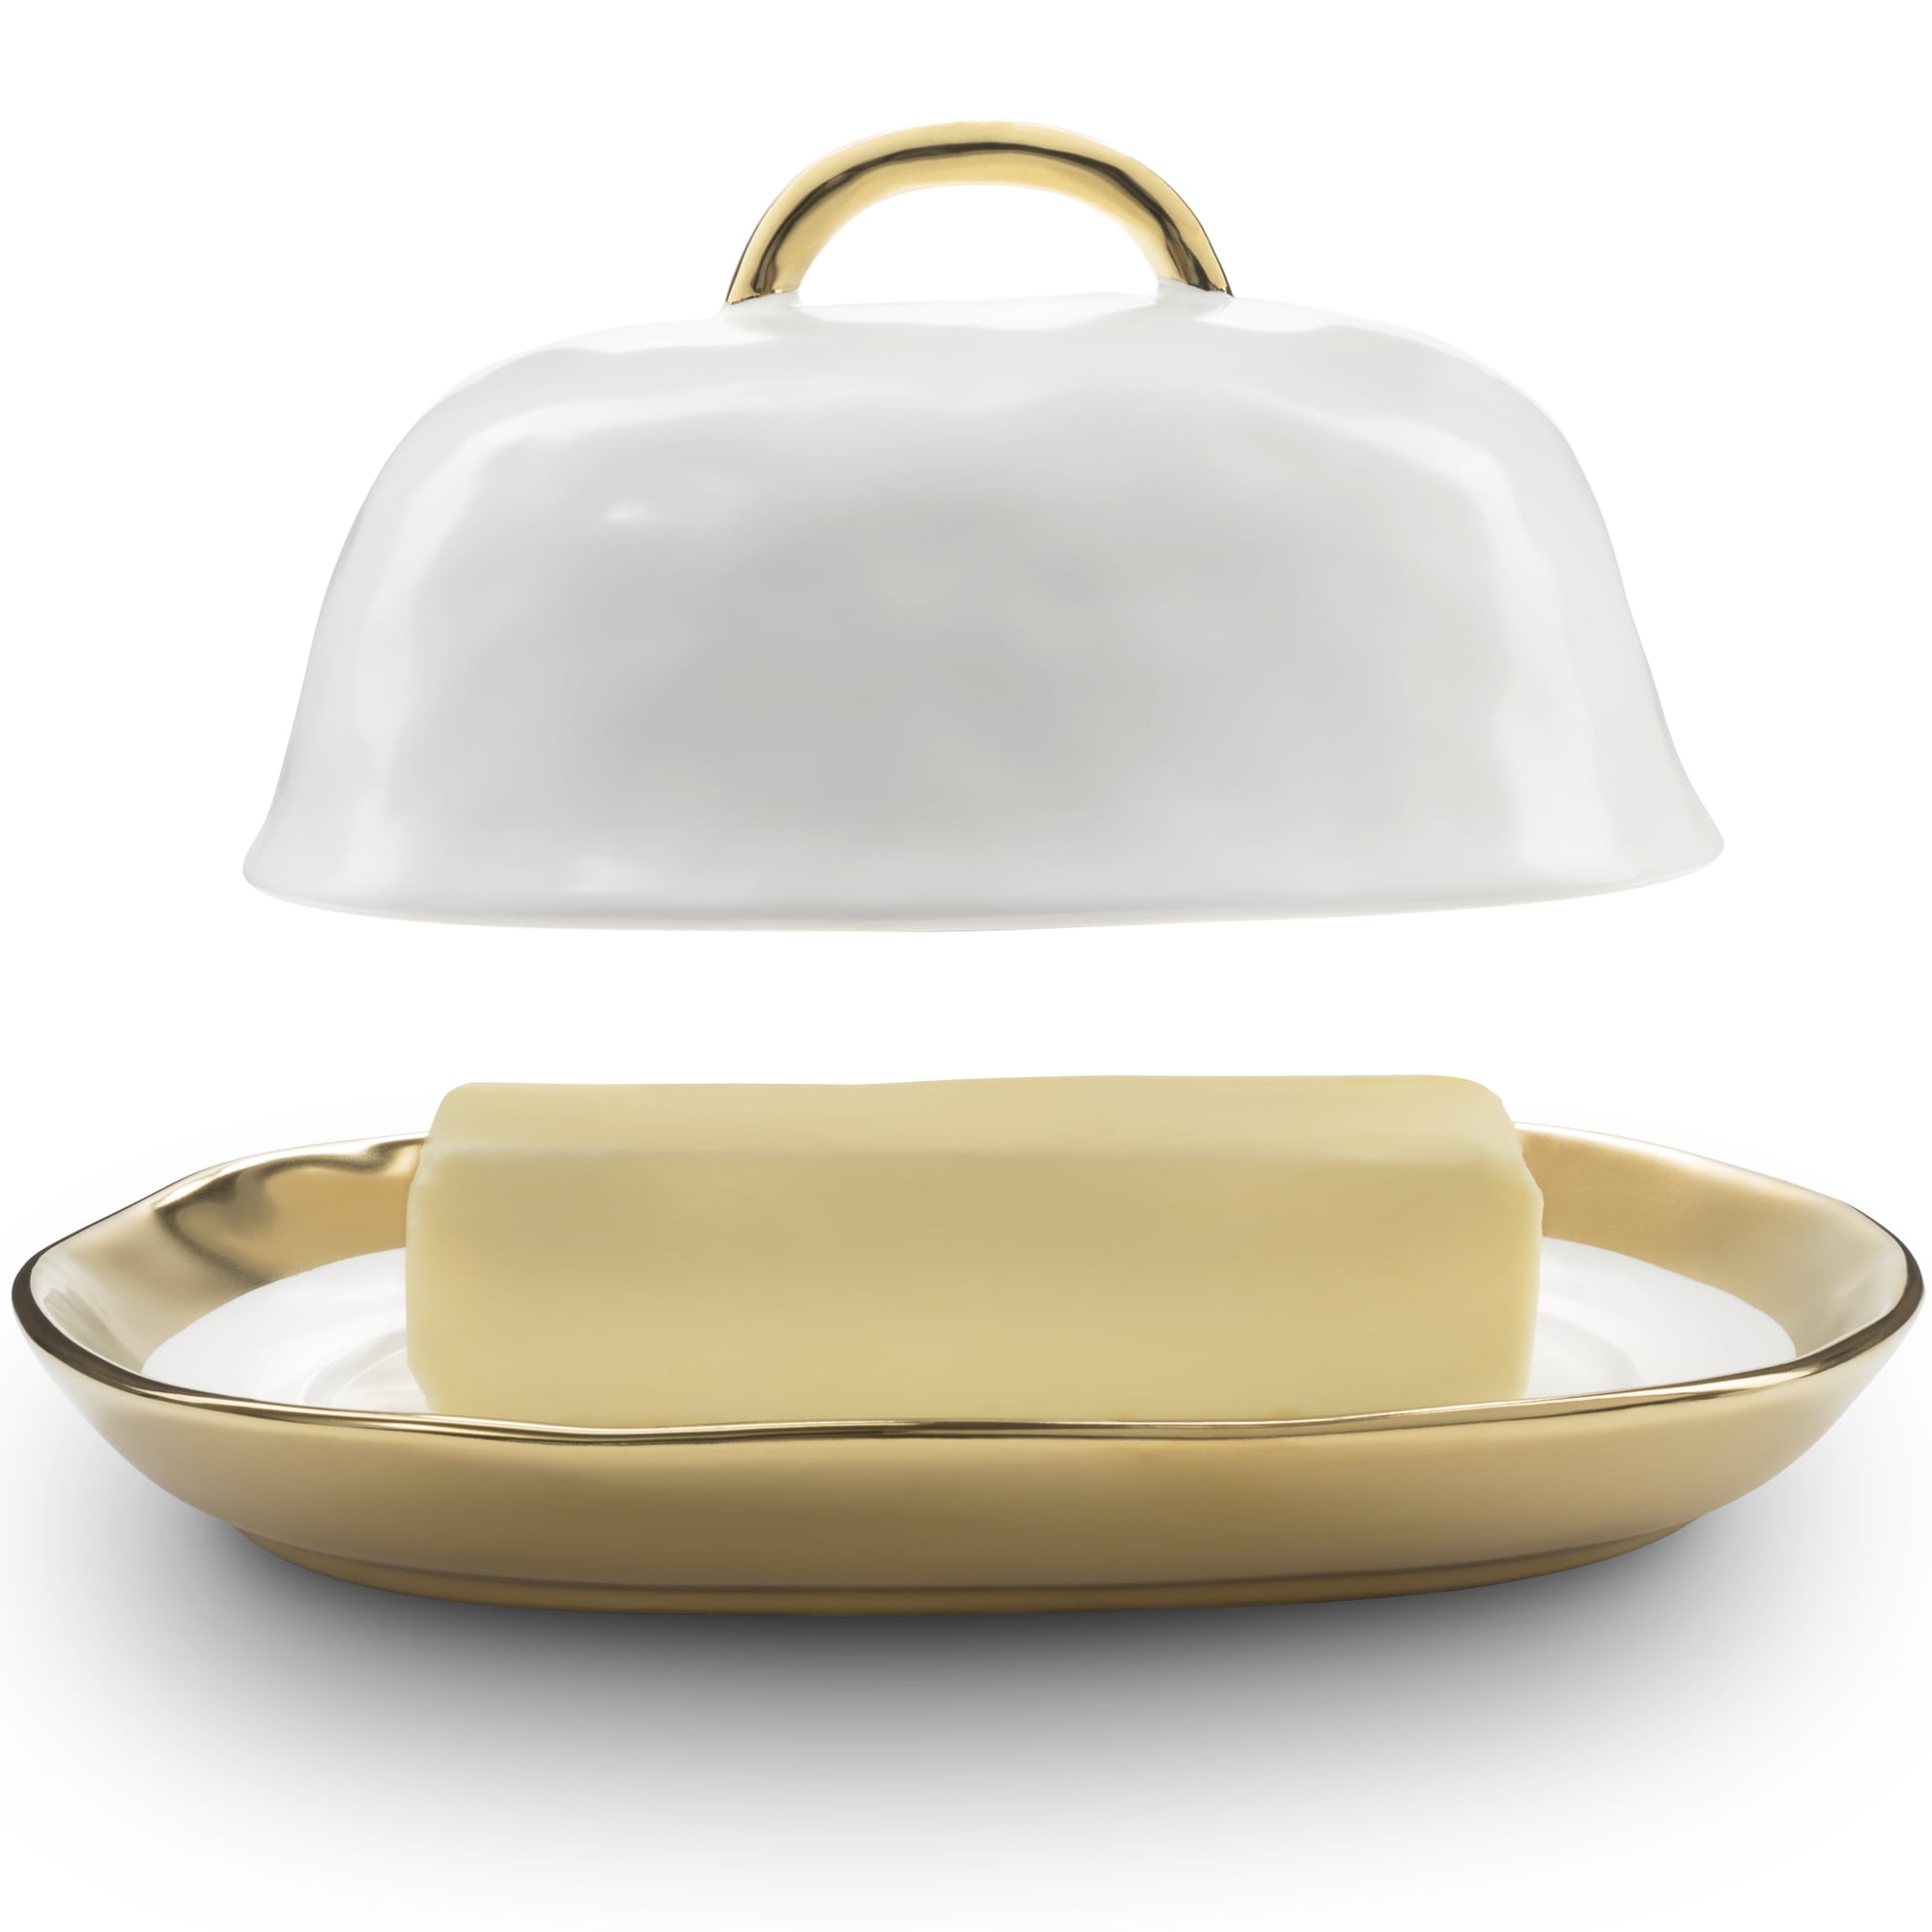 butter dishes